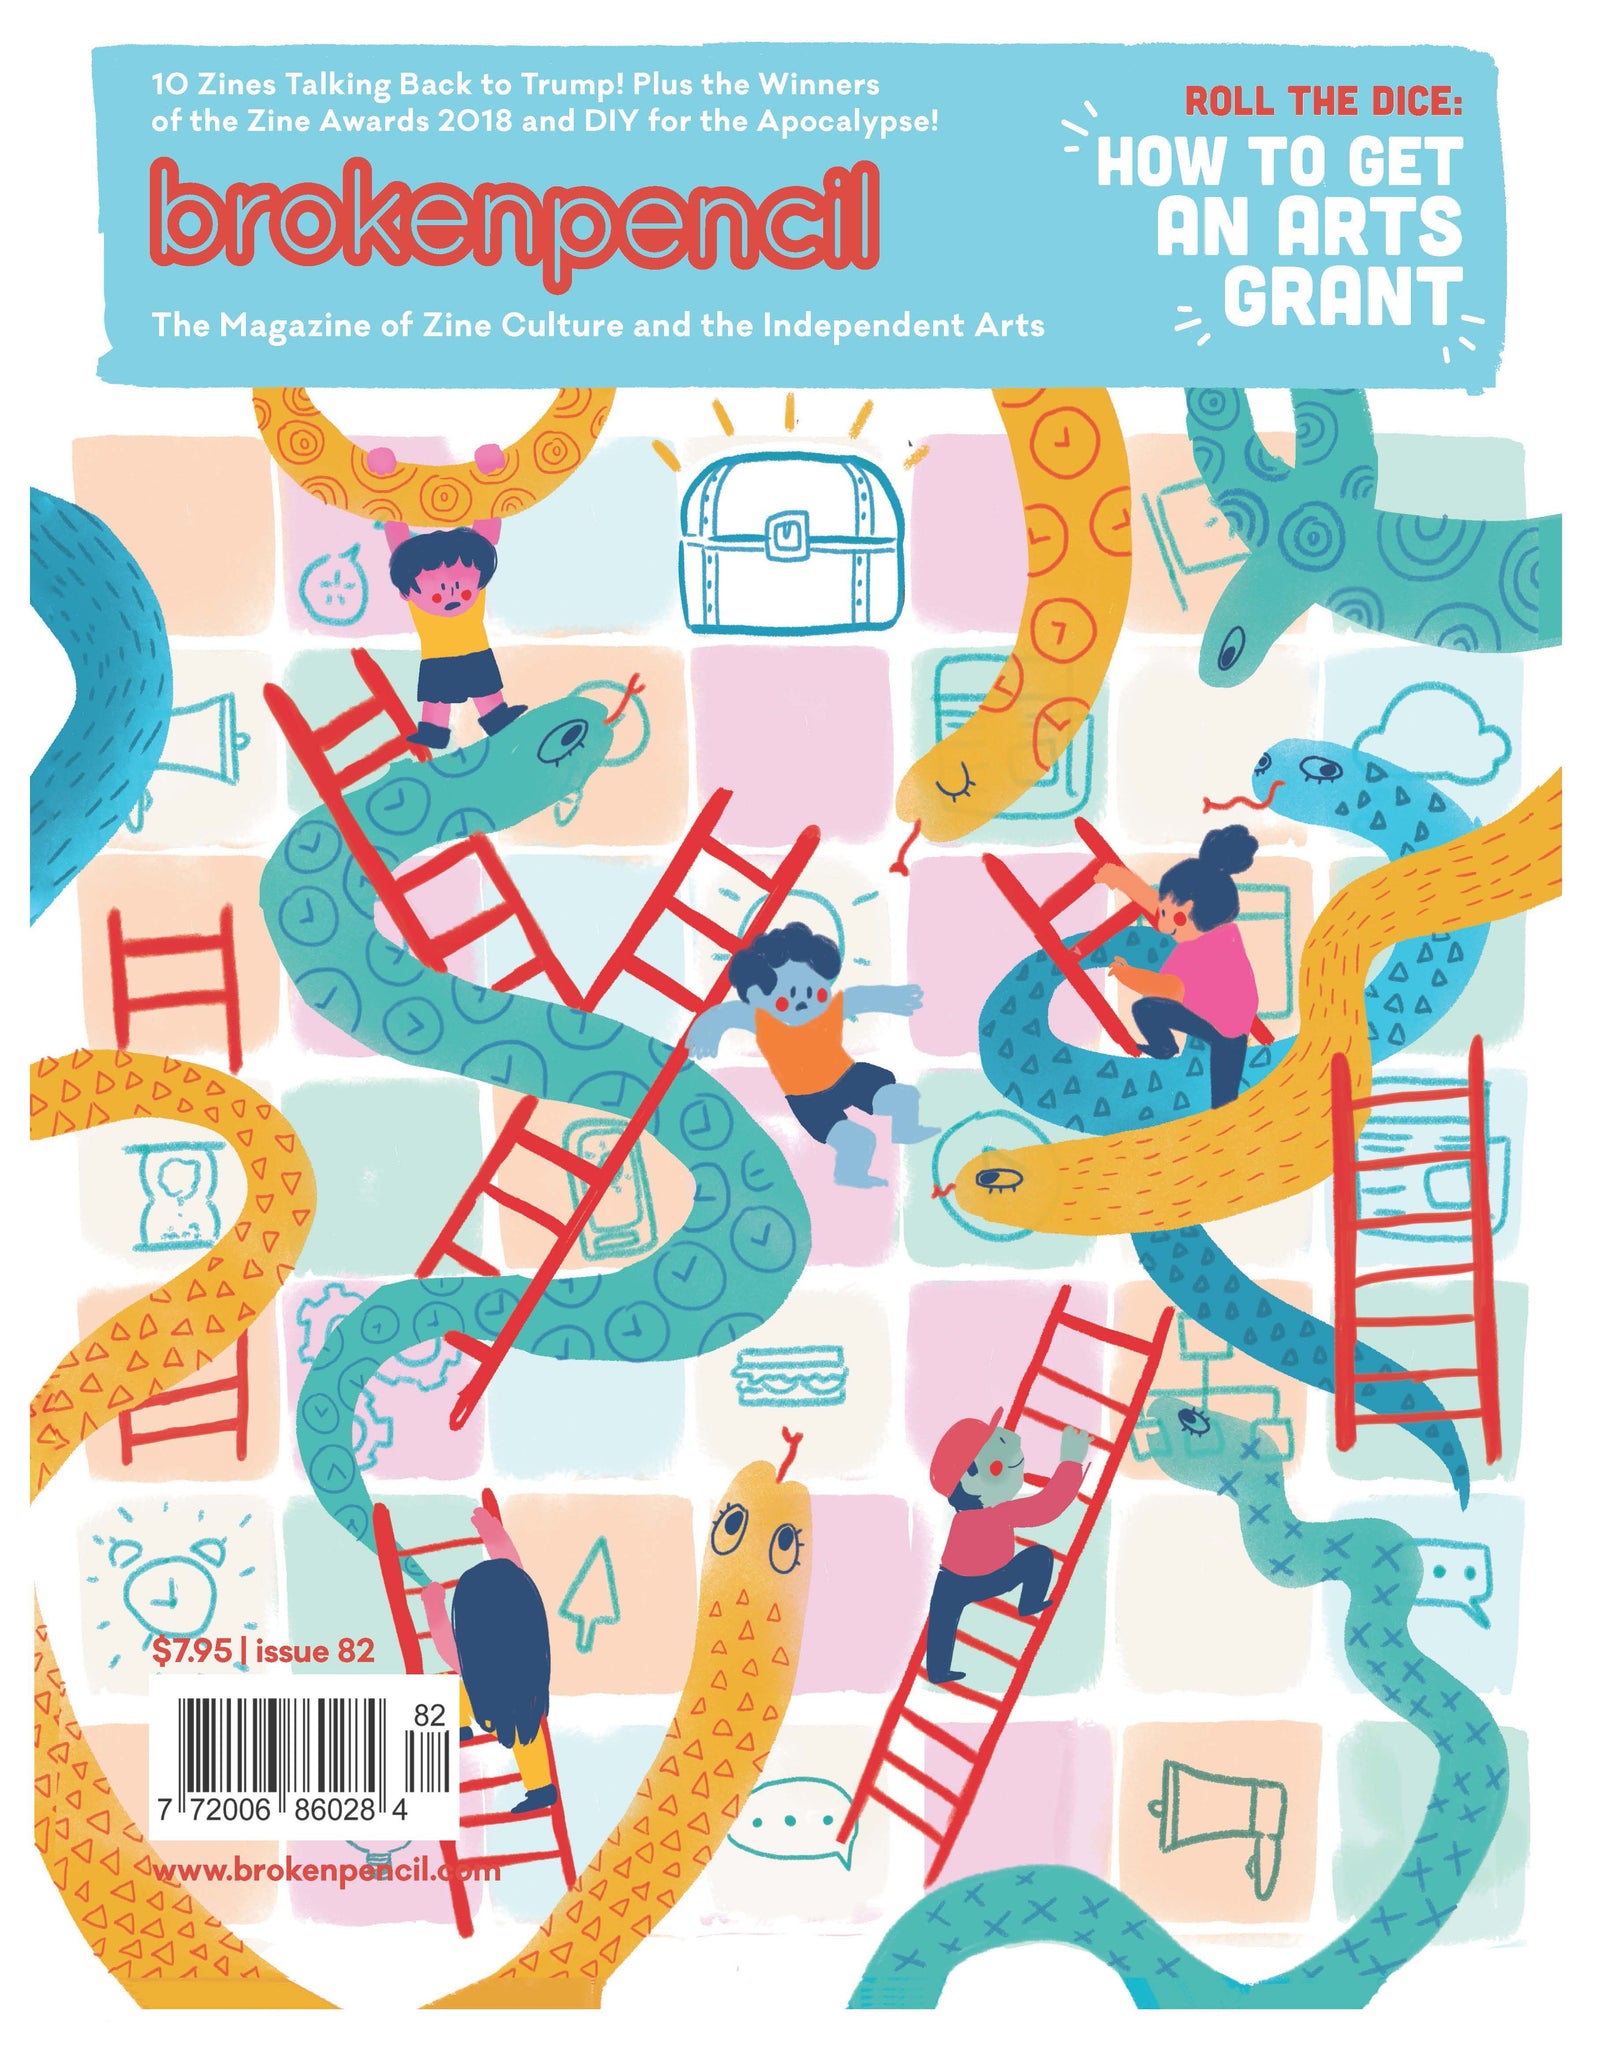 Issue 82: How to Get an Arts Grant plus Winners of the 2018 Zine Awards